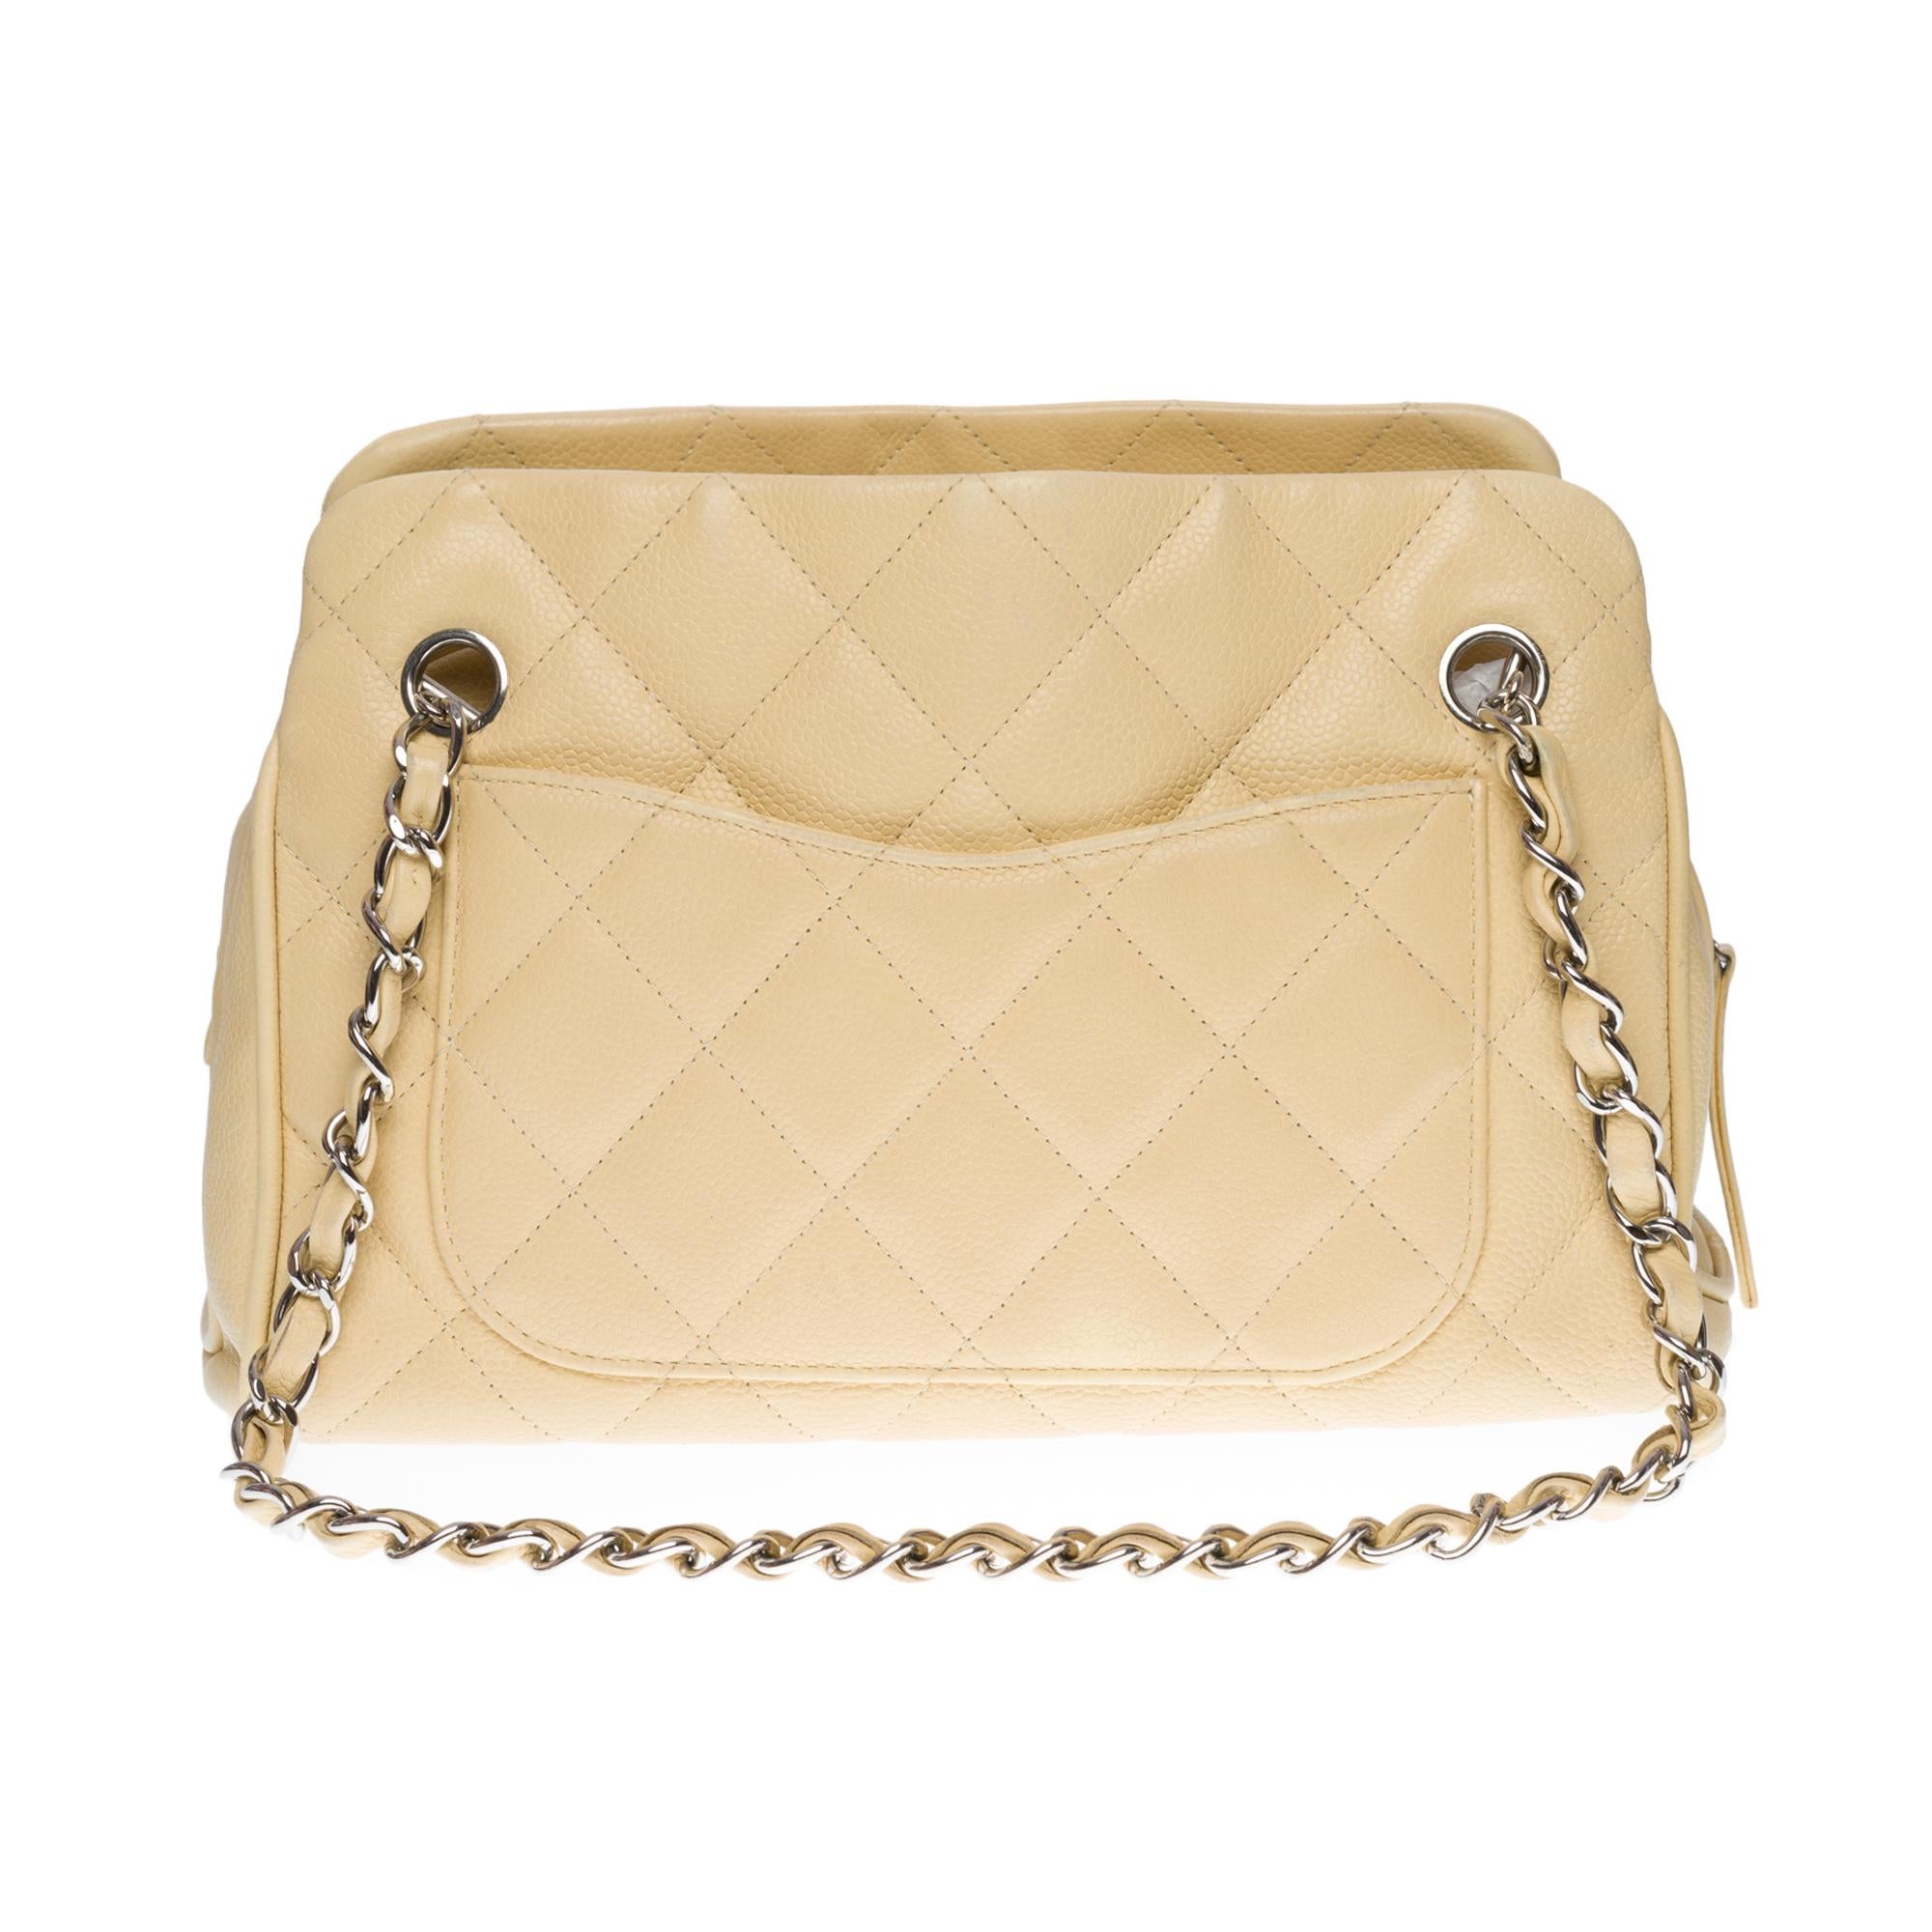 Stunning Chanel Classic shoulder bag in beige quilted caviar leather, silver metal hardware, double silver metal chain handle interwoven with beige leather for a hand or shoulder carry

Top zipper closure
Beige leather lining, 1 zippered pocket, 1